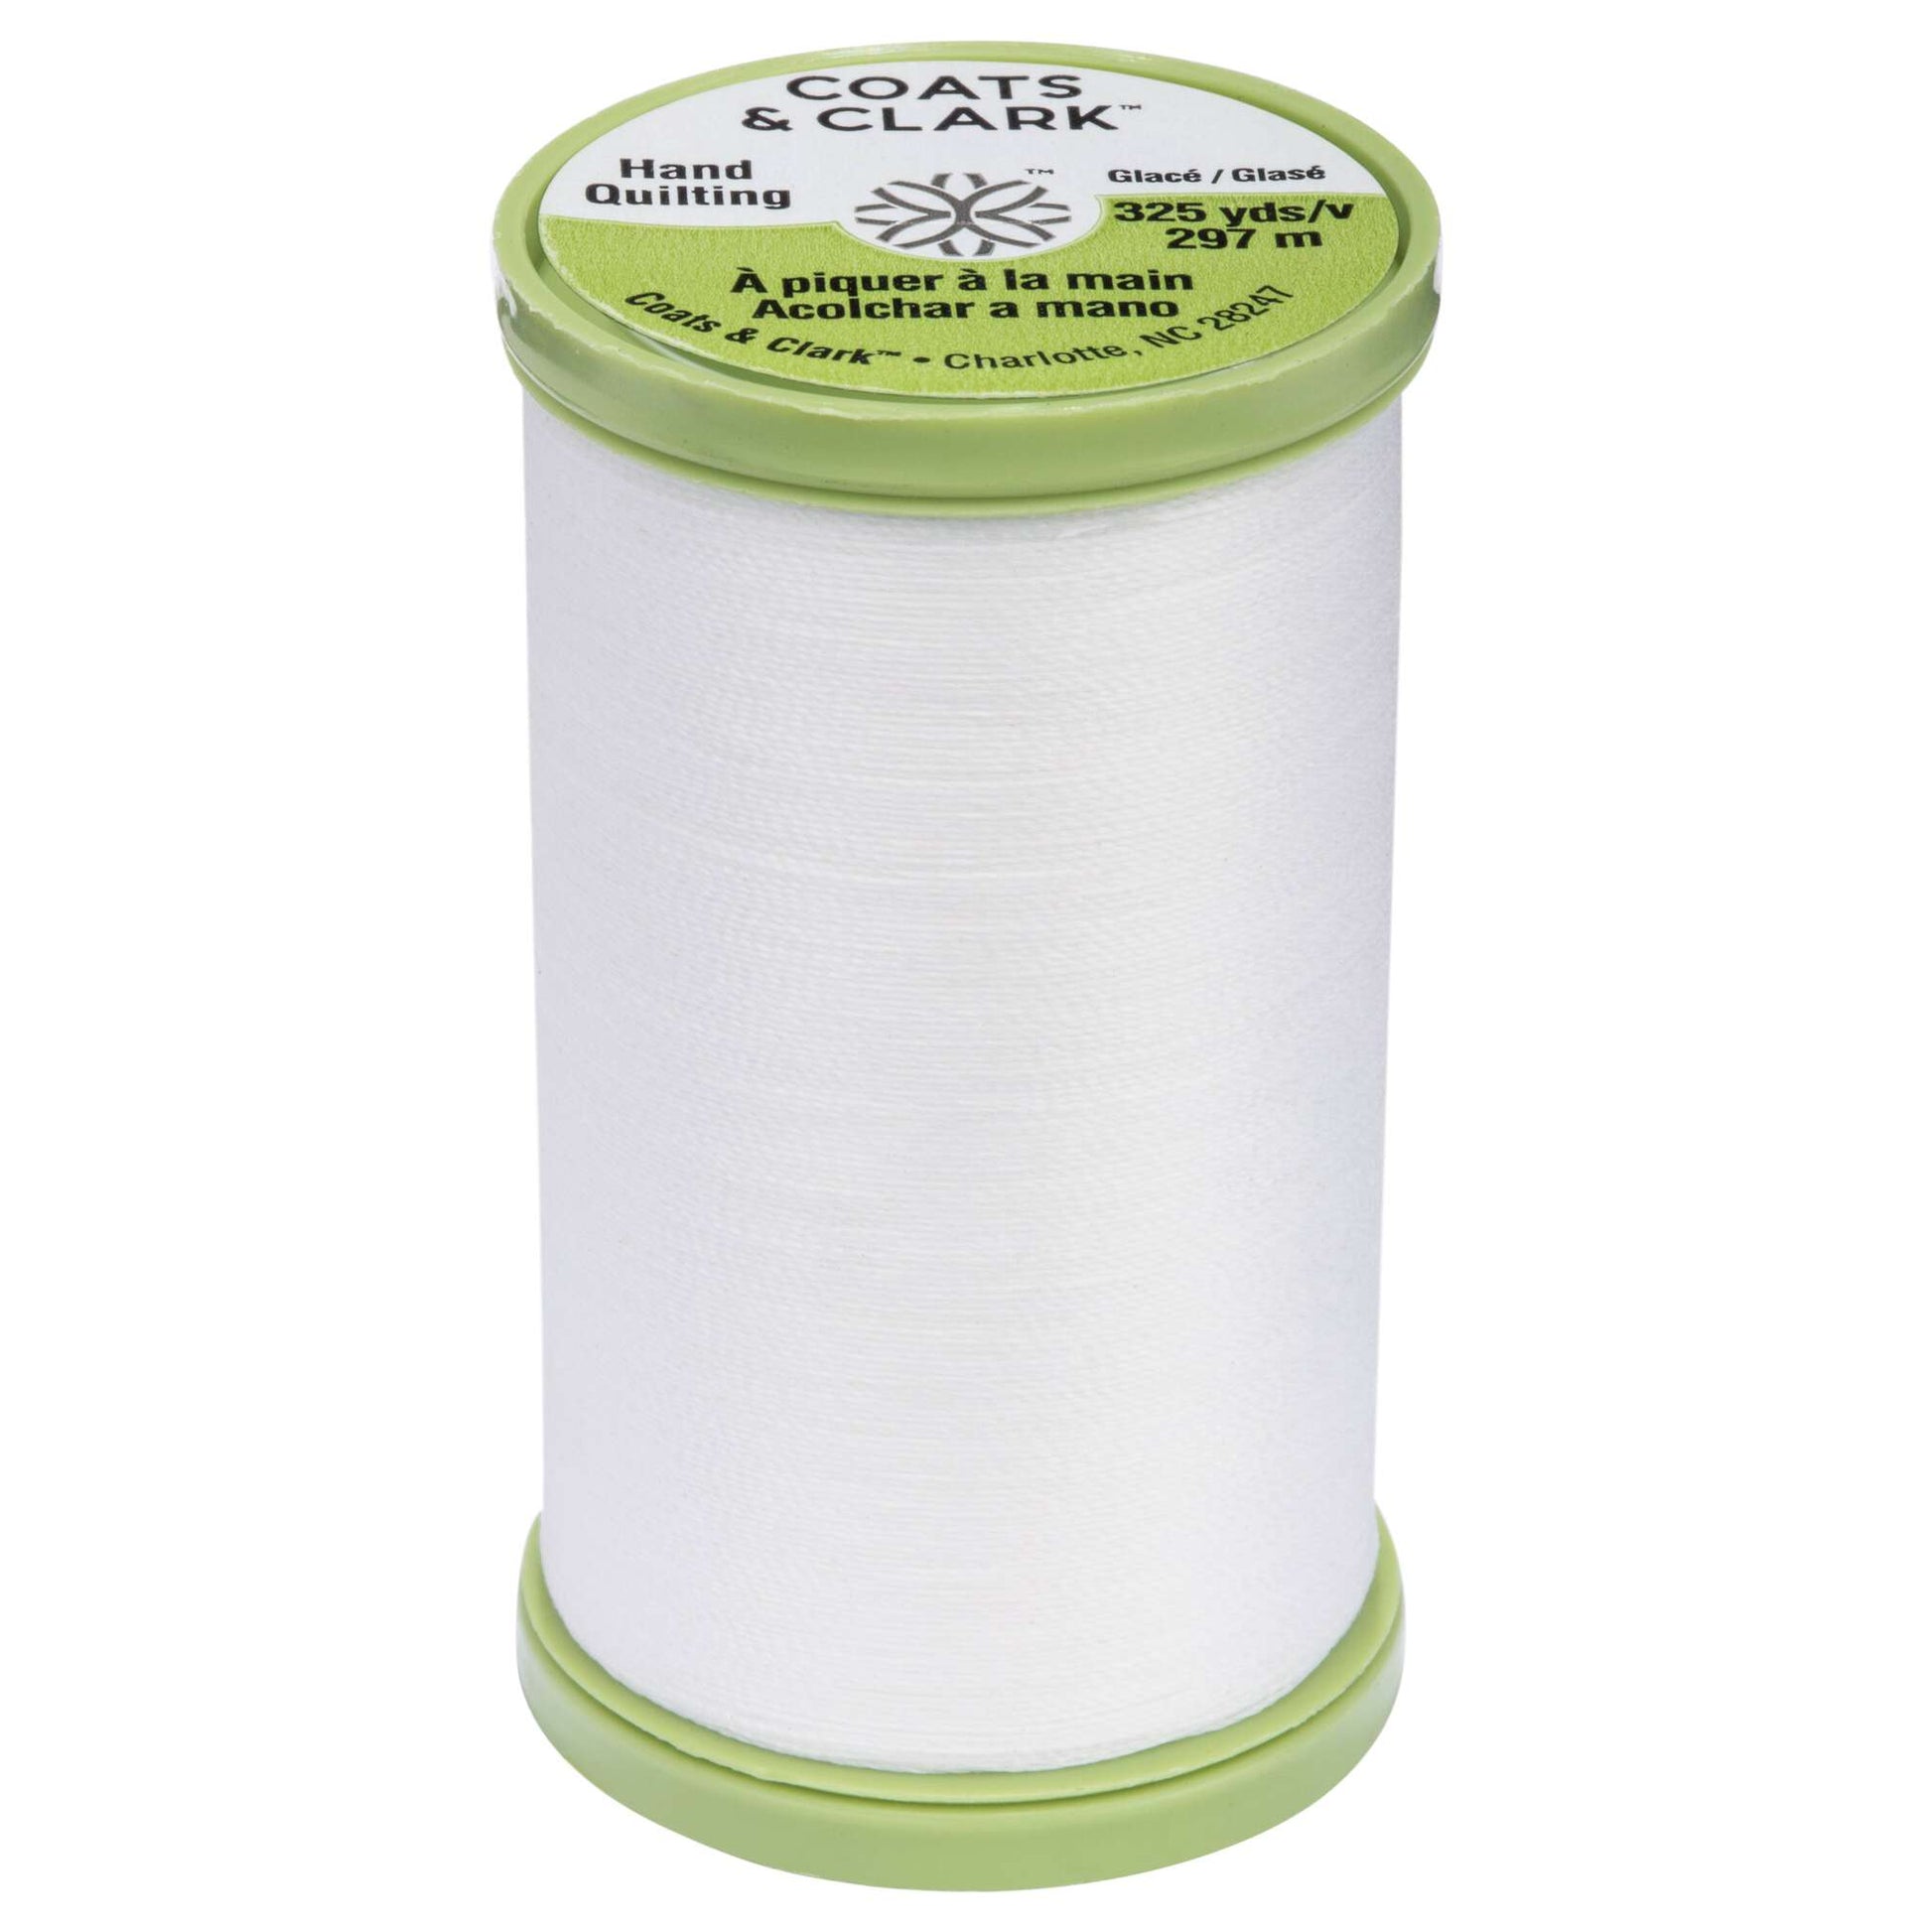 Pink - Dual Duty Plus Hand Quilting Thread 325yd - Coats